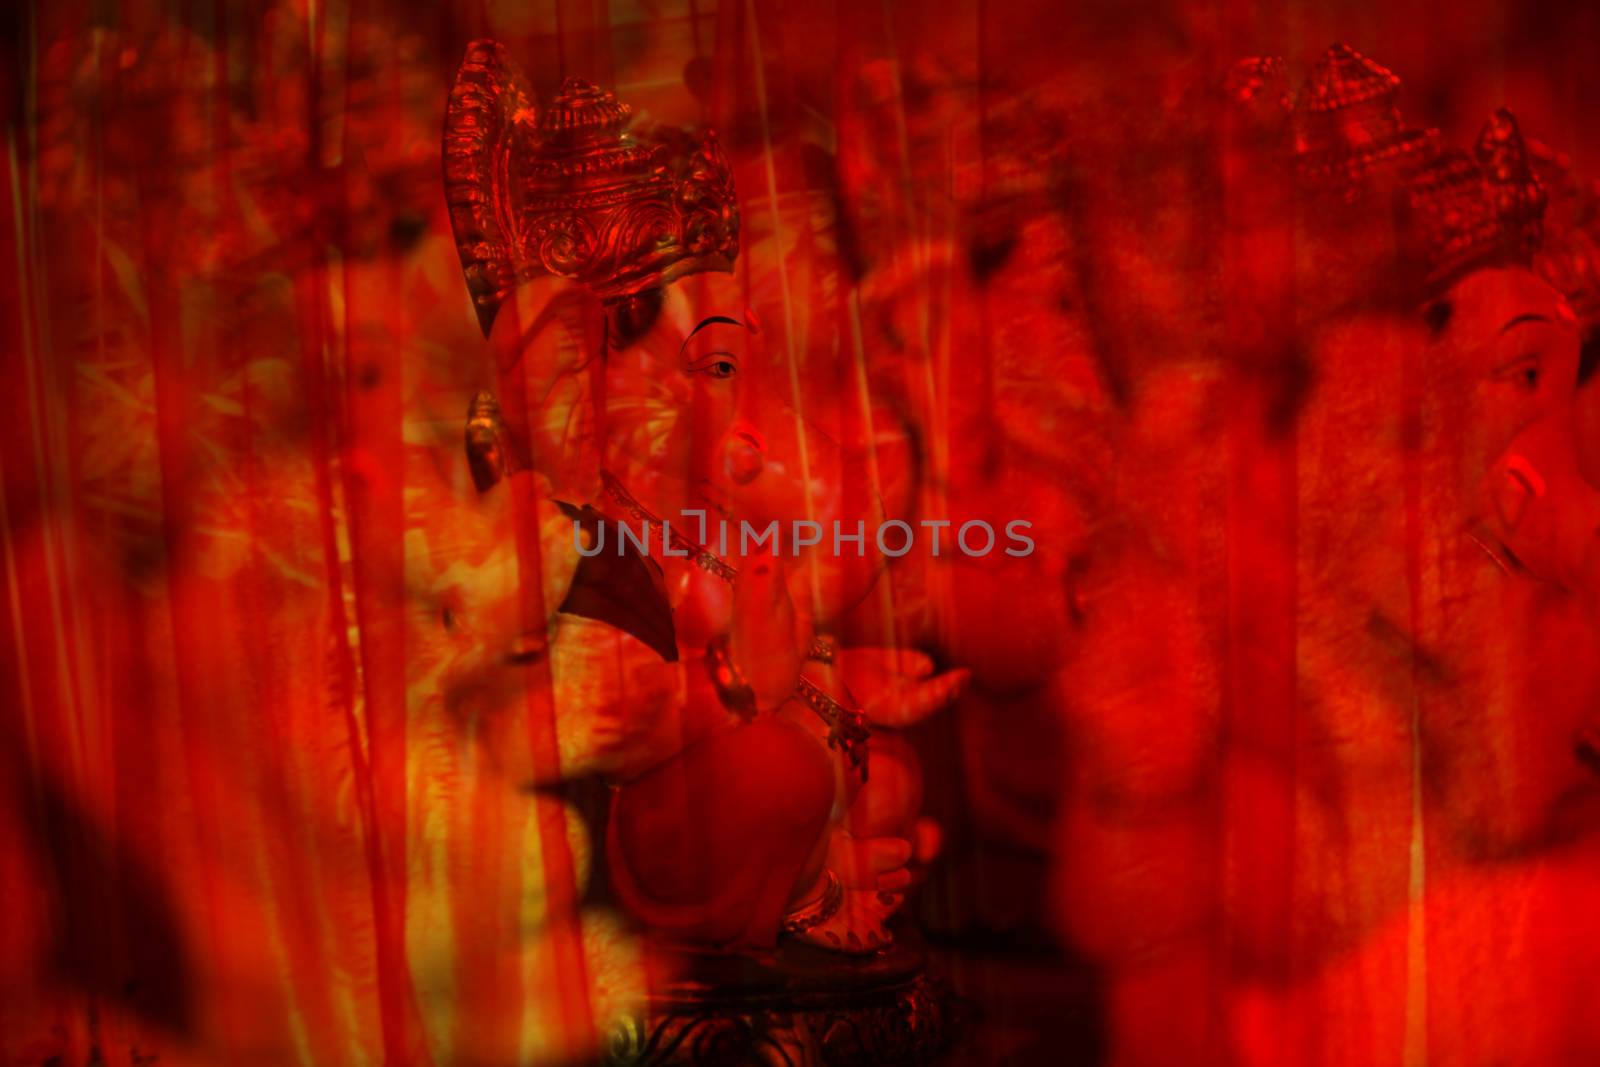 Lord Ganesh in Red Curtains by thefinalmiracle